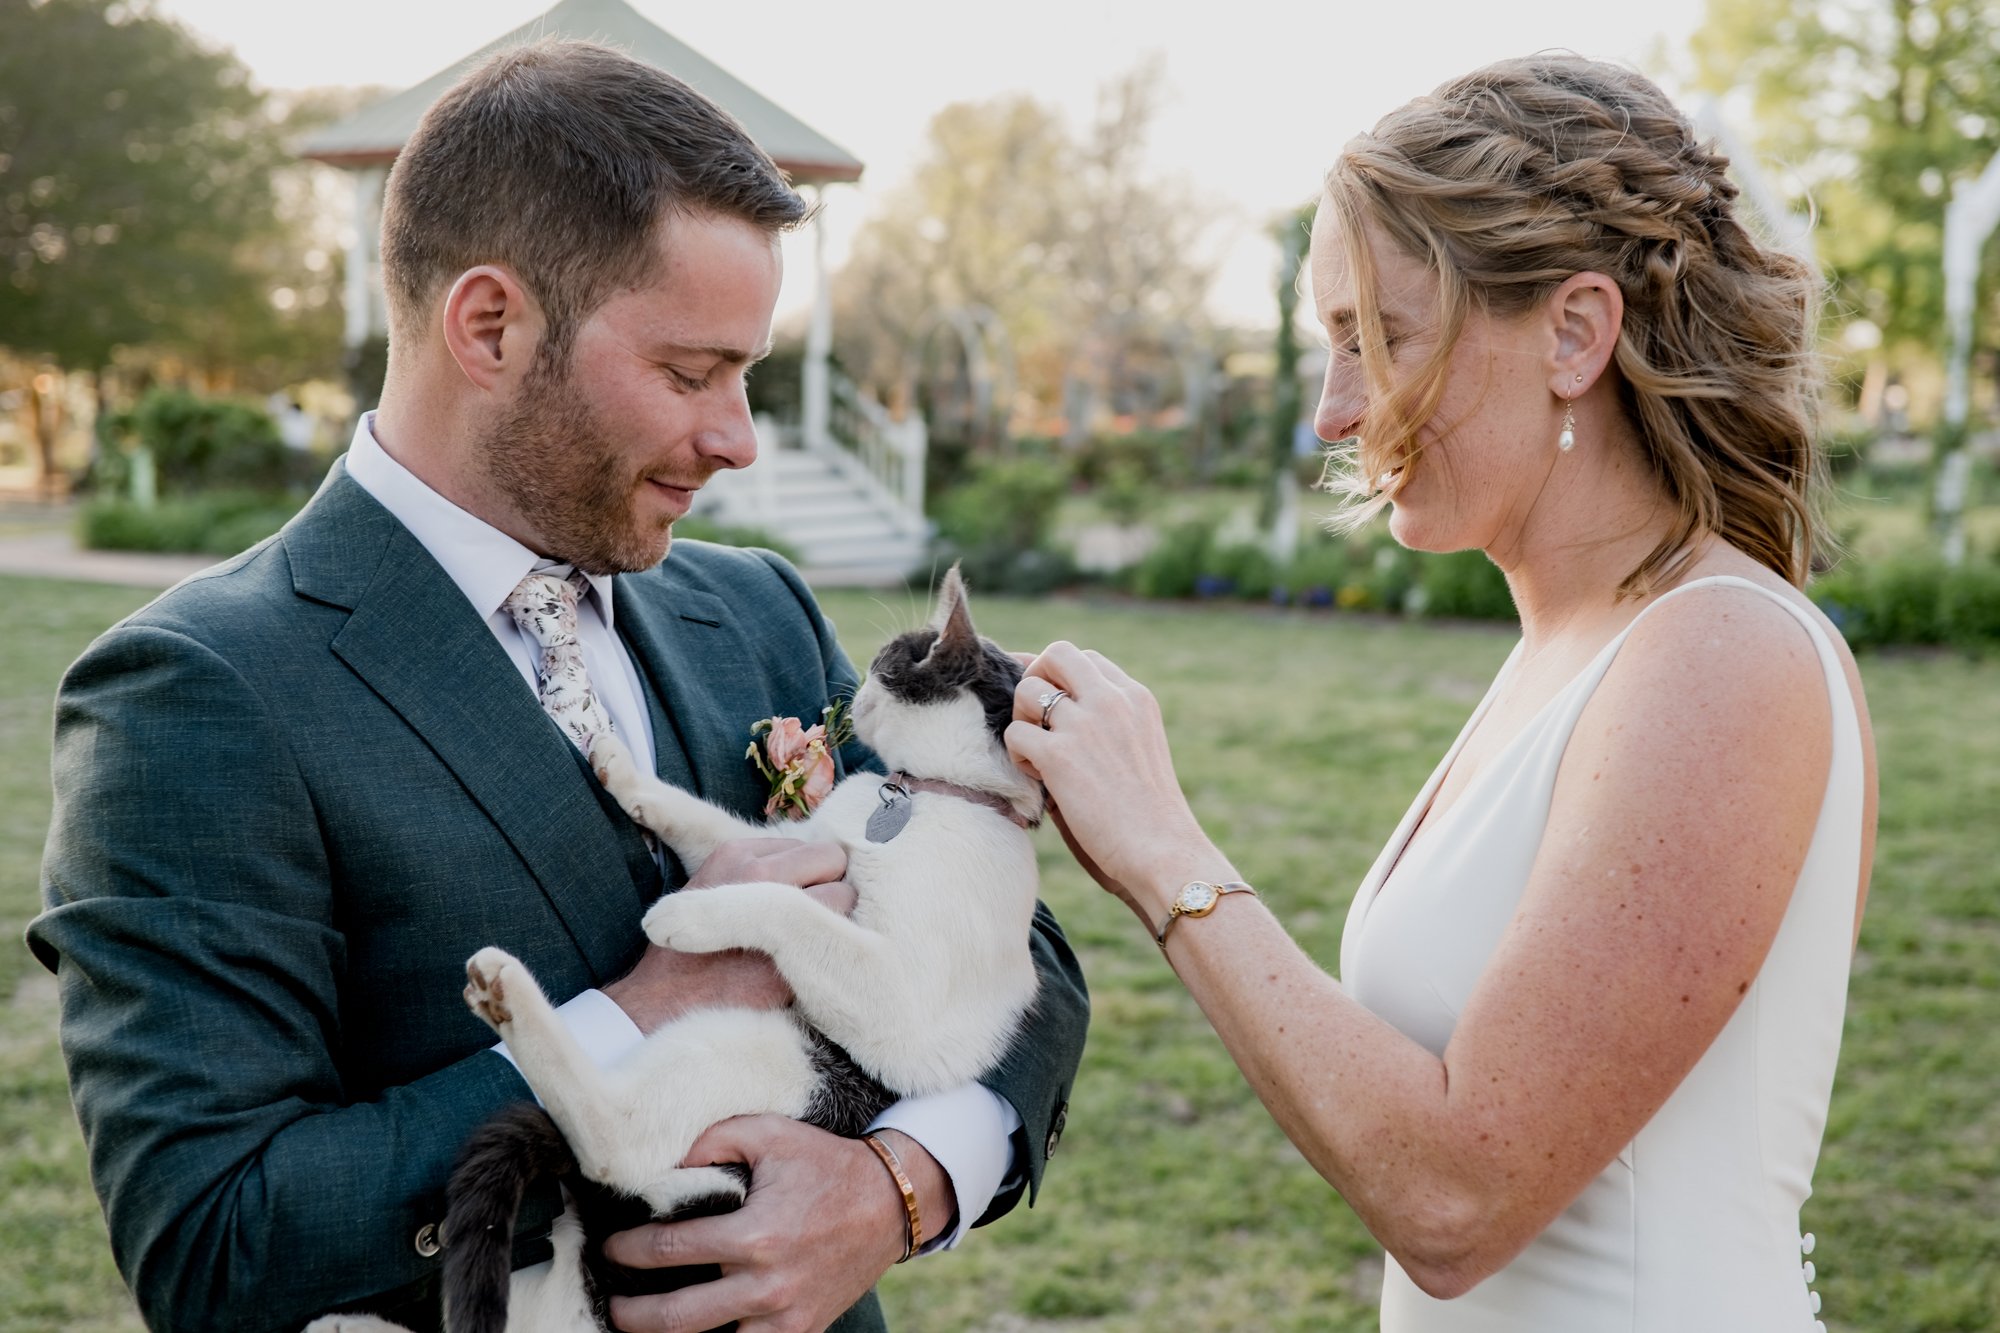 Bride and groom play with a cat - Wedding at Antique Rose Emporium